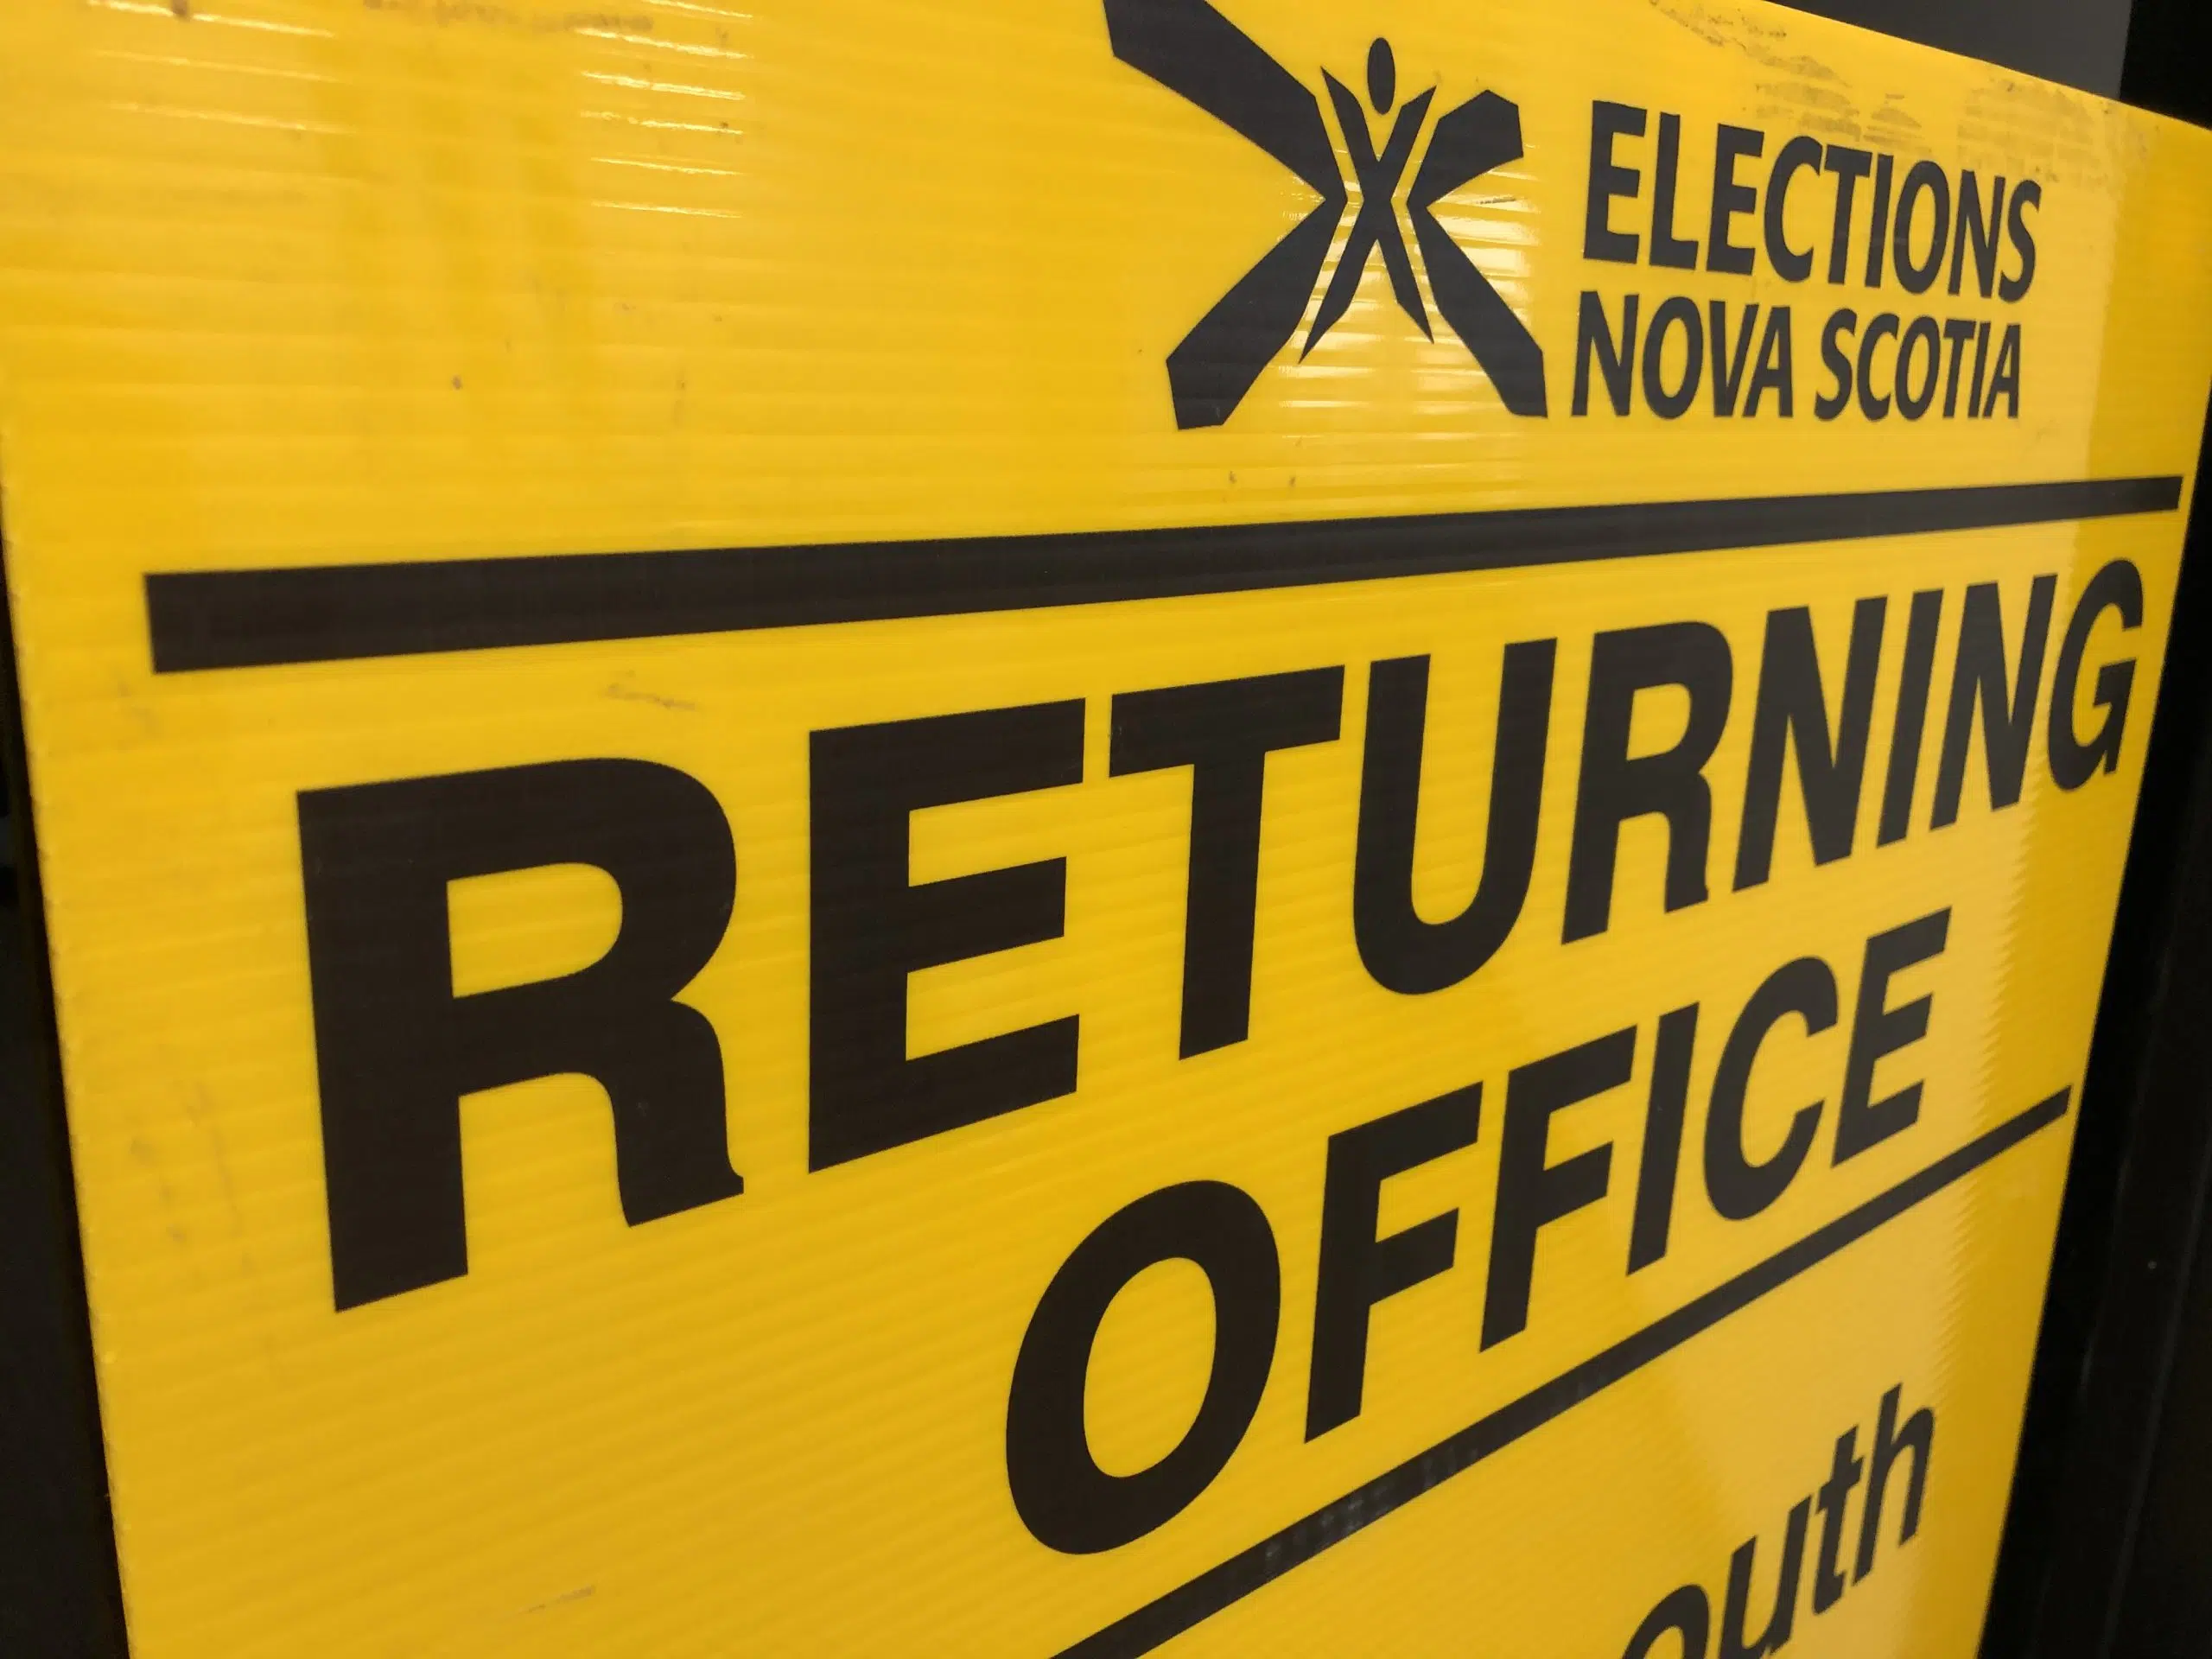 Elections Nova Scotia issues unofficial voter turnout results